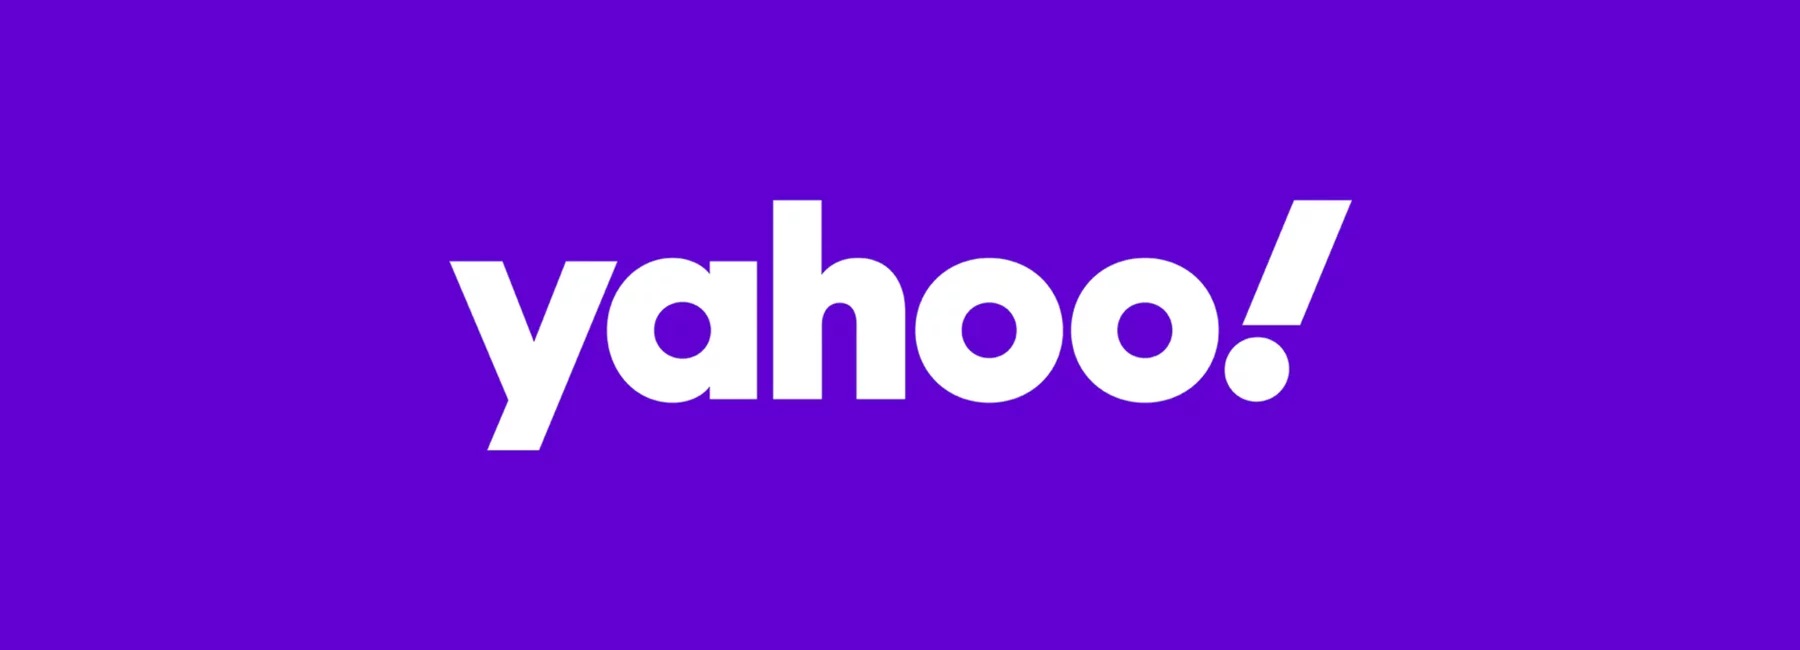 Yahoo! redesigns its logo and it's good